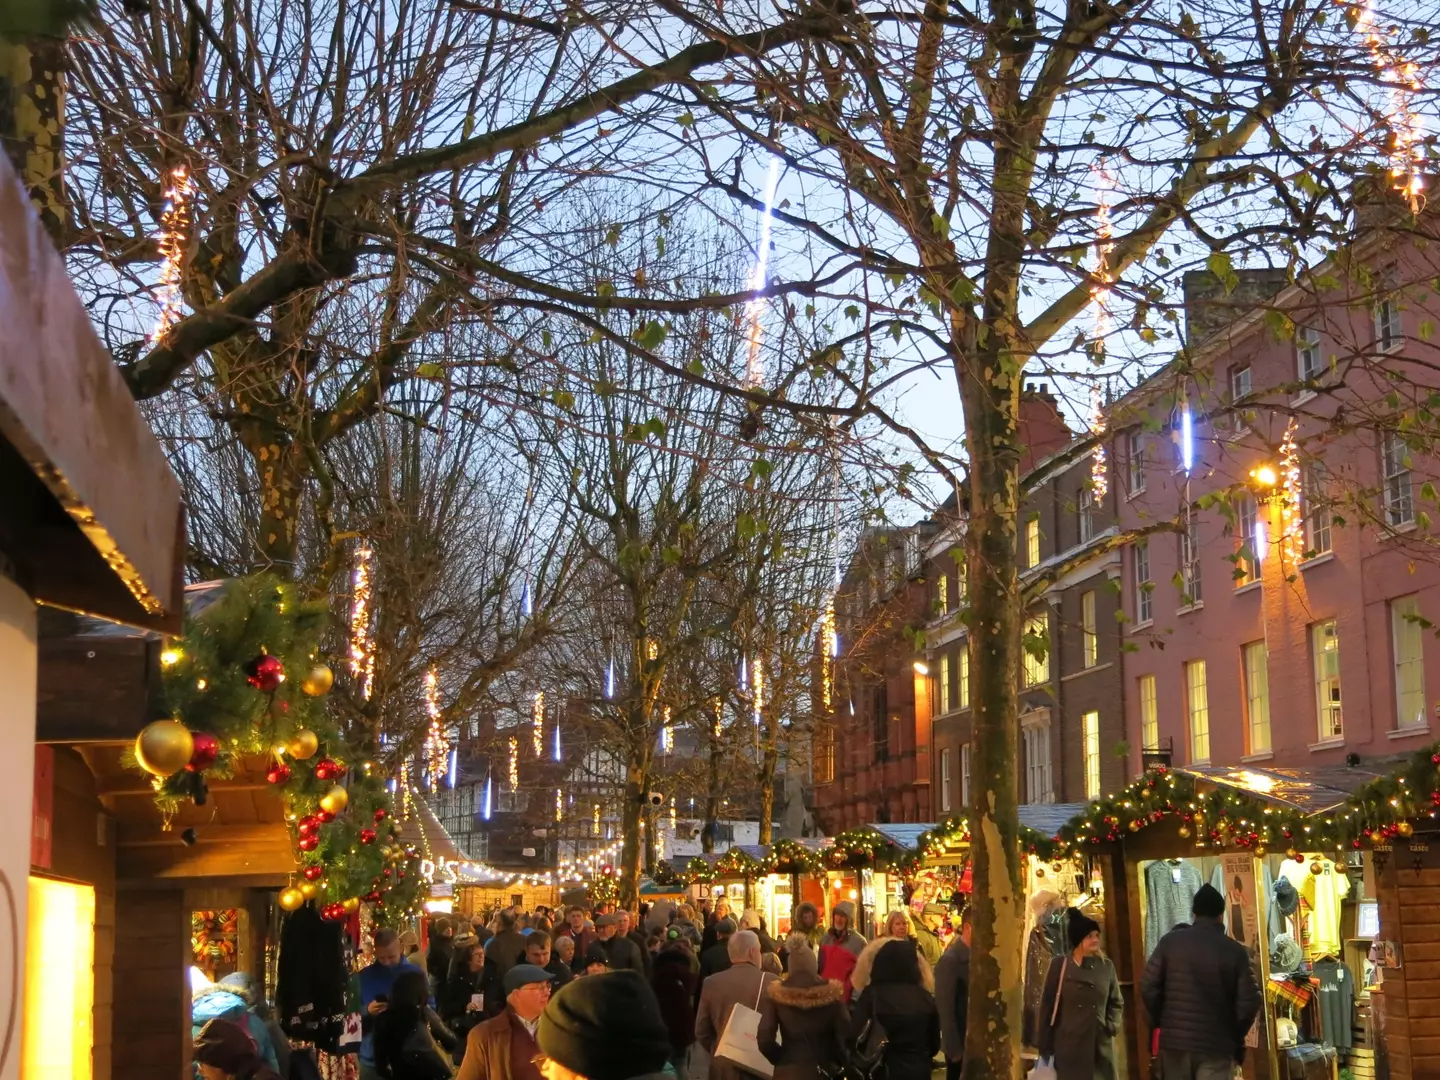 York's St Nicholas Fair is the fifth best Christmas market according to the new research.